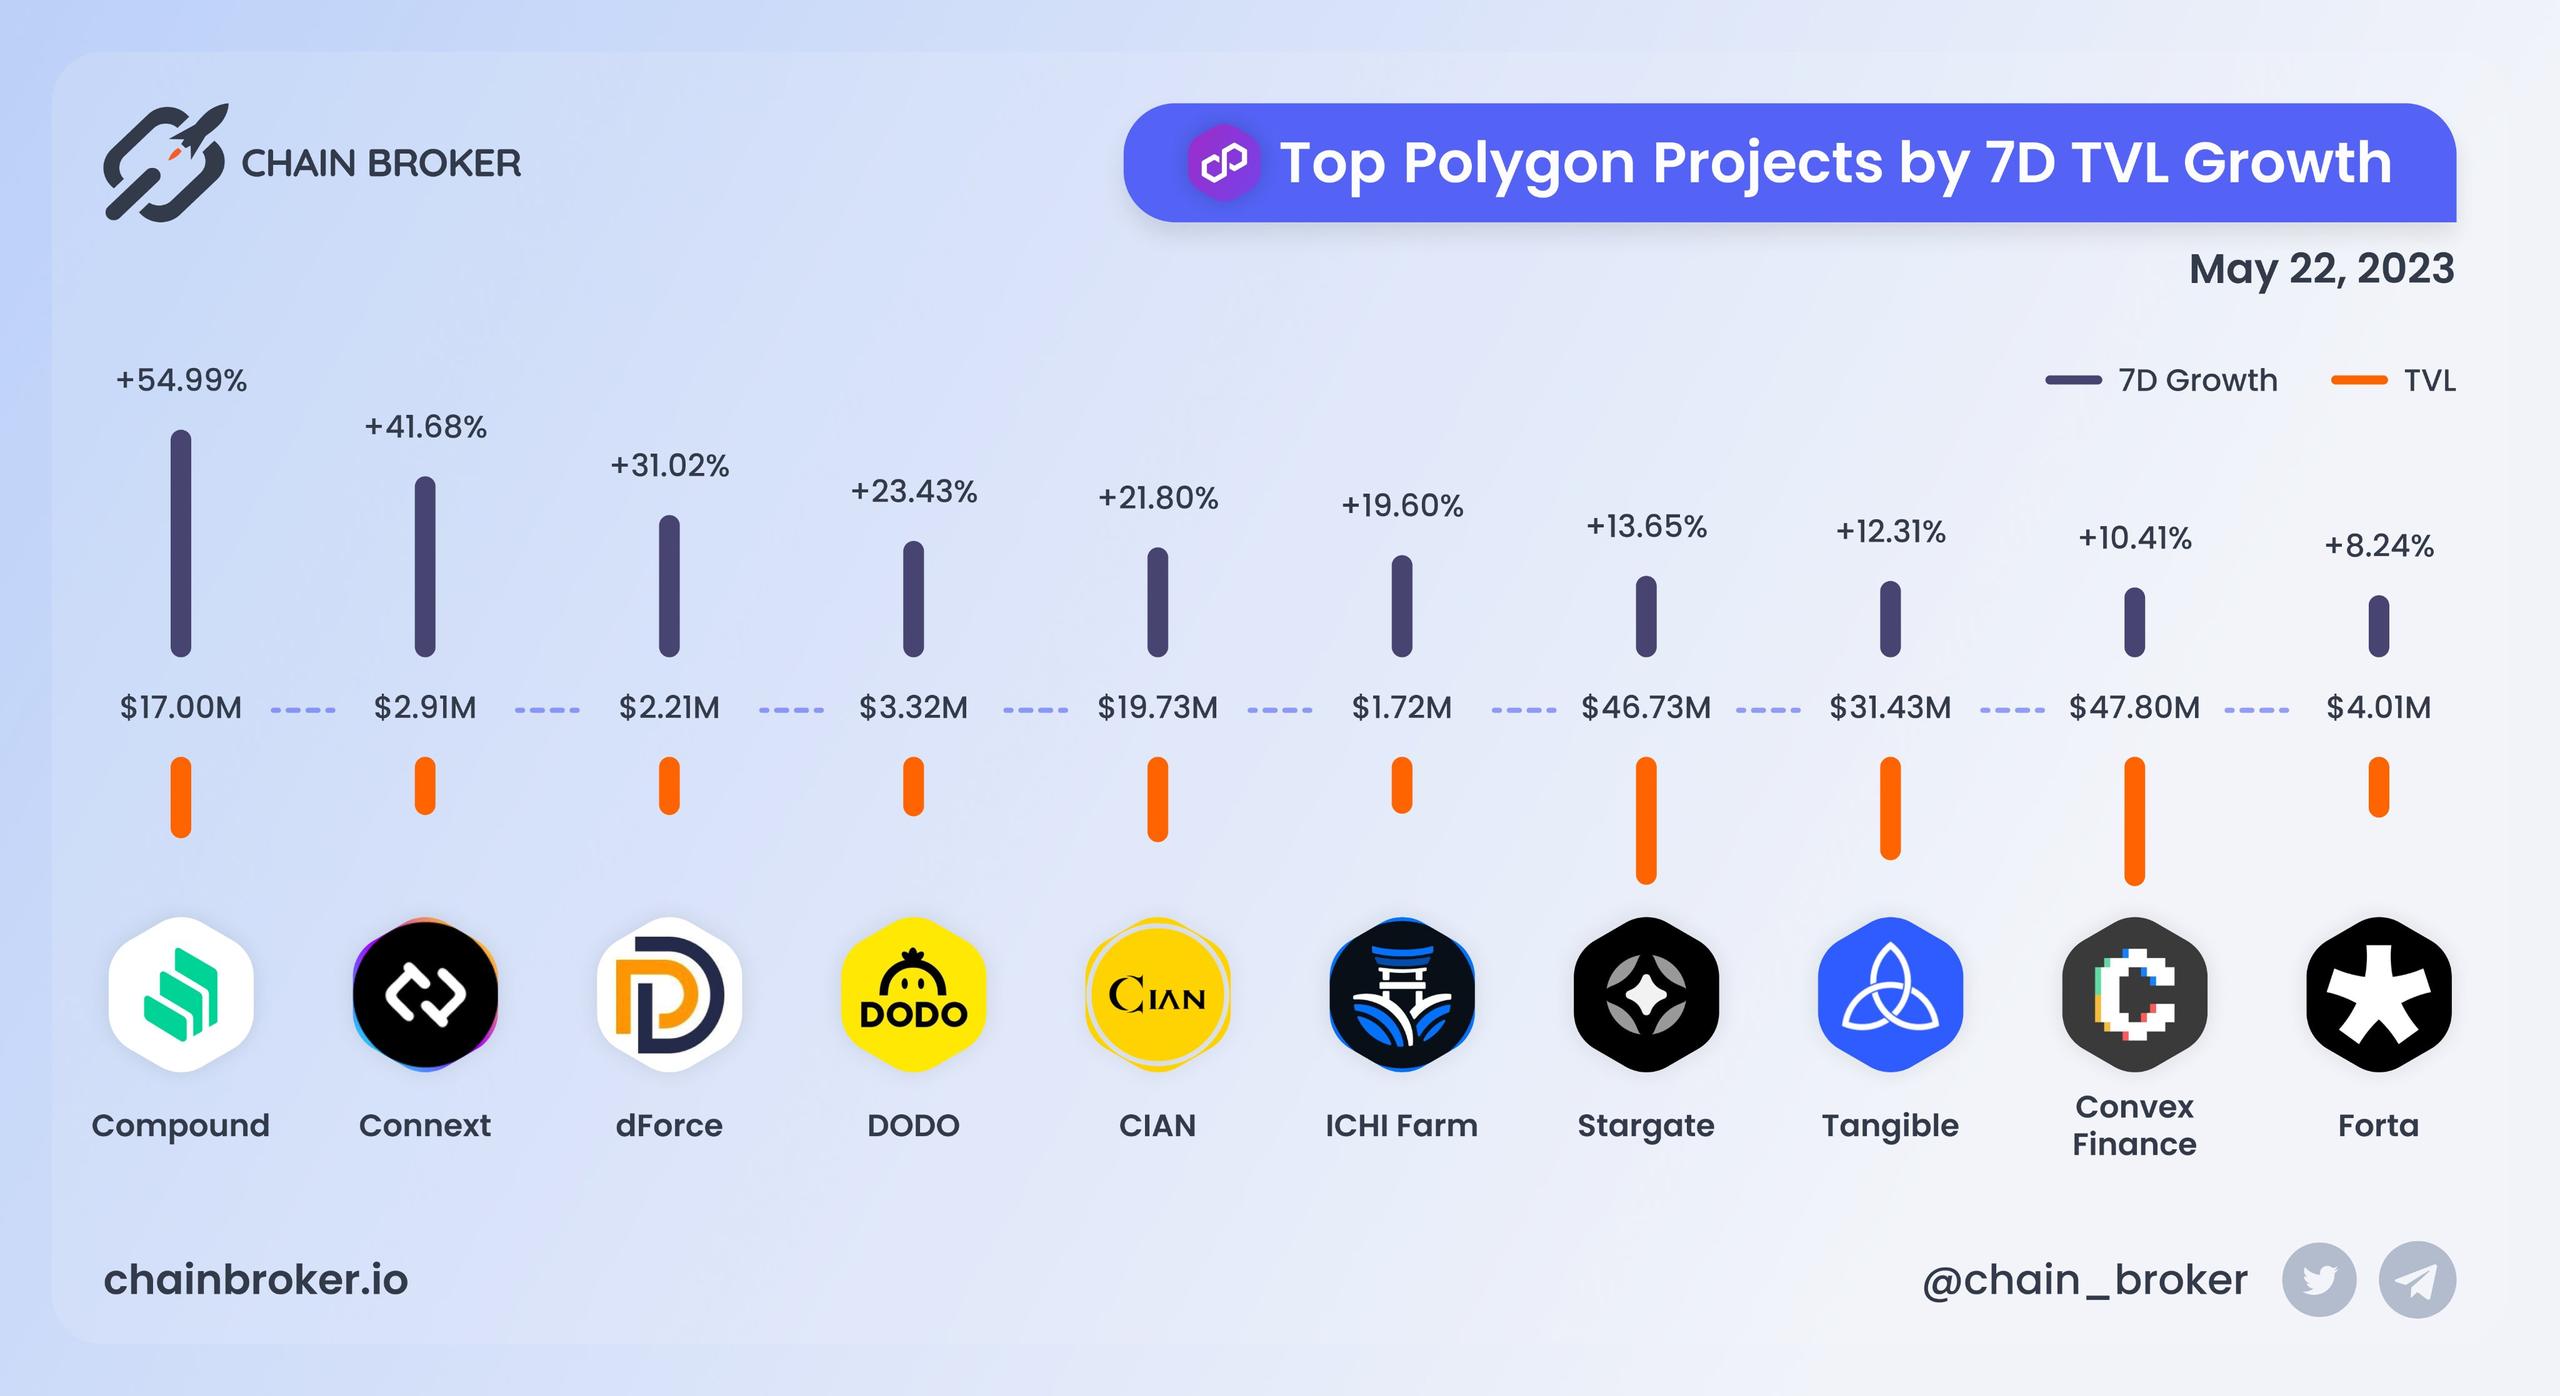 Top Polygon projects by 7D TVL growth